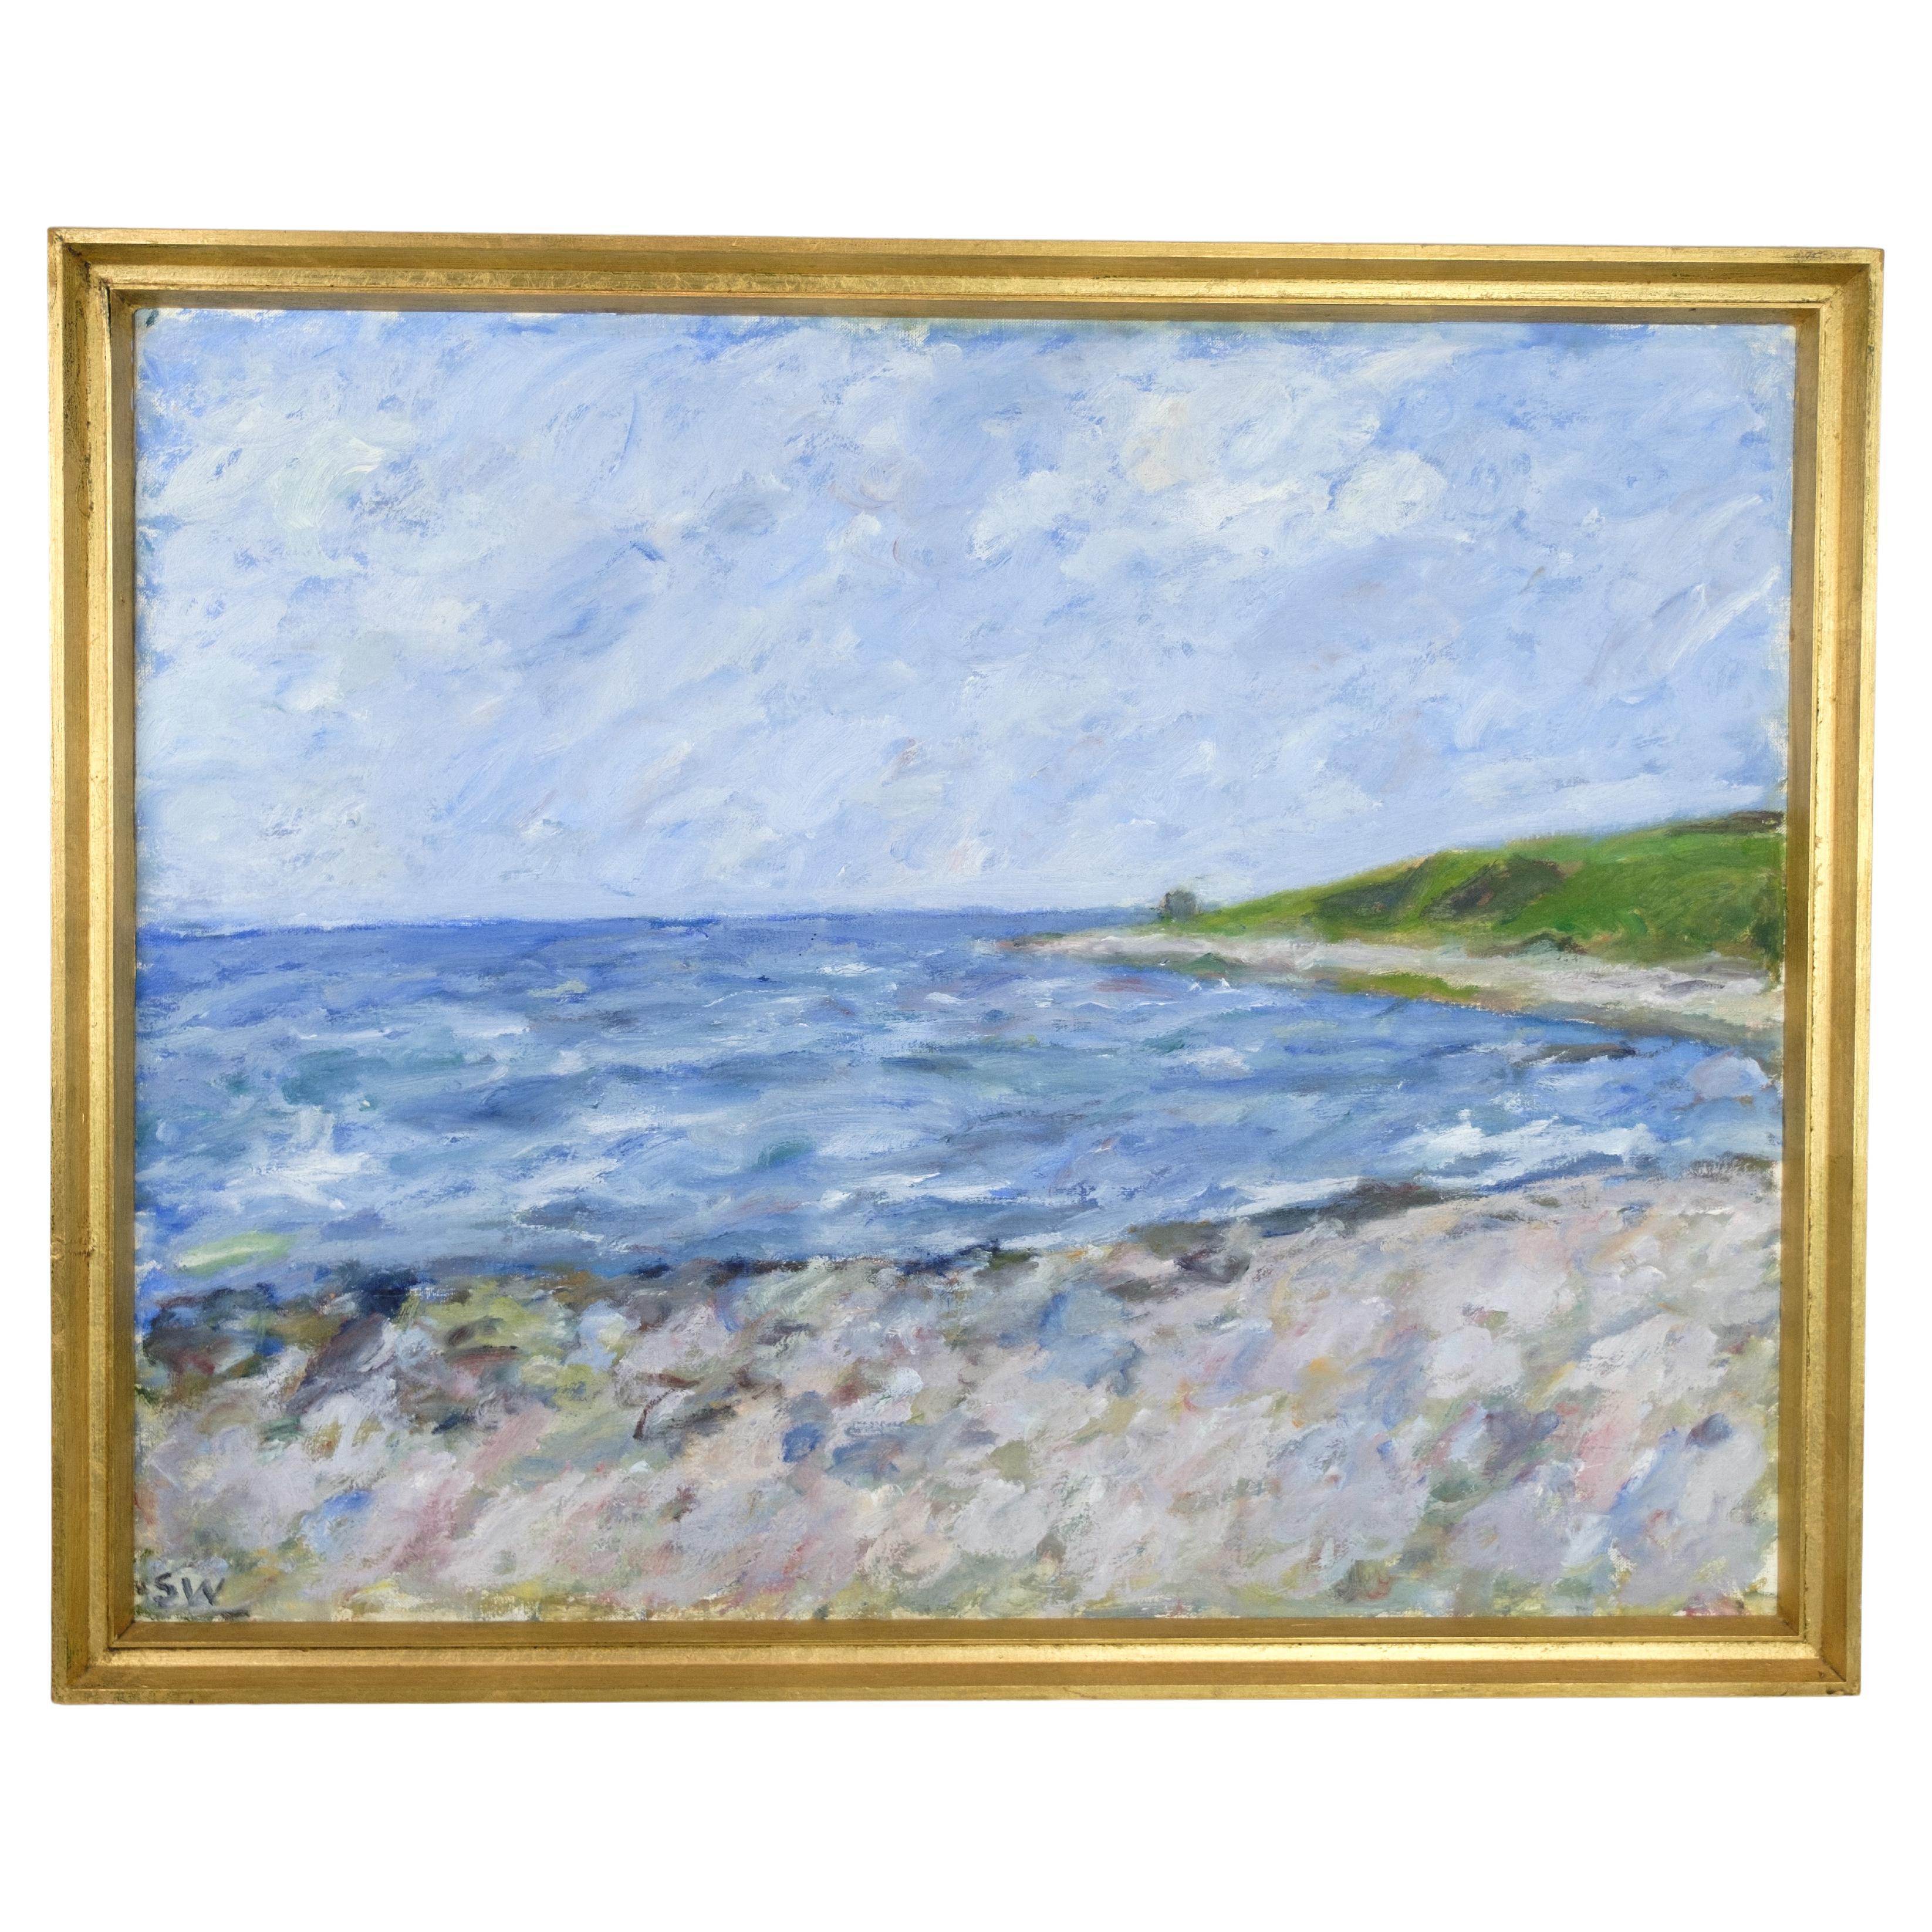 Oil Painting On Canvas With Motif Of Beach & Sea By Sixten Wiklund From 1957s